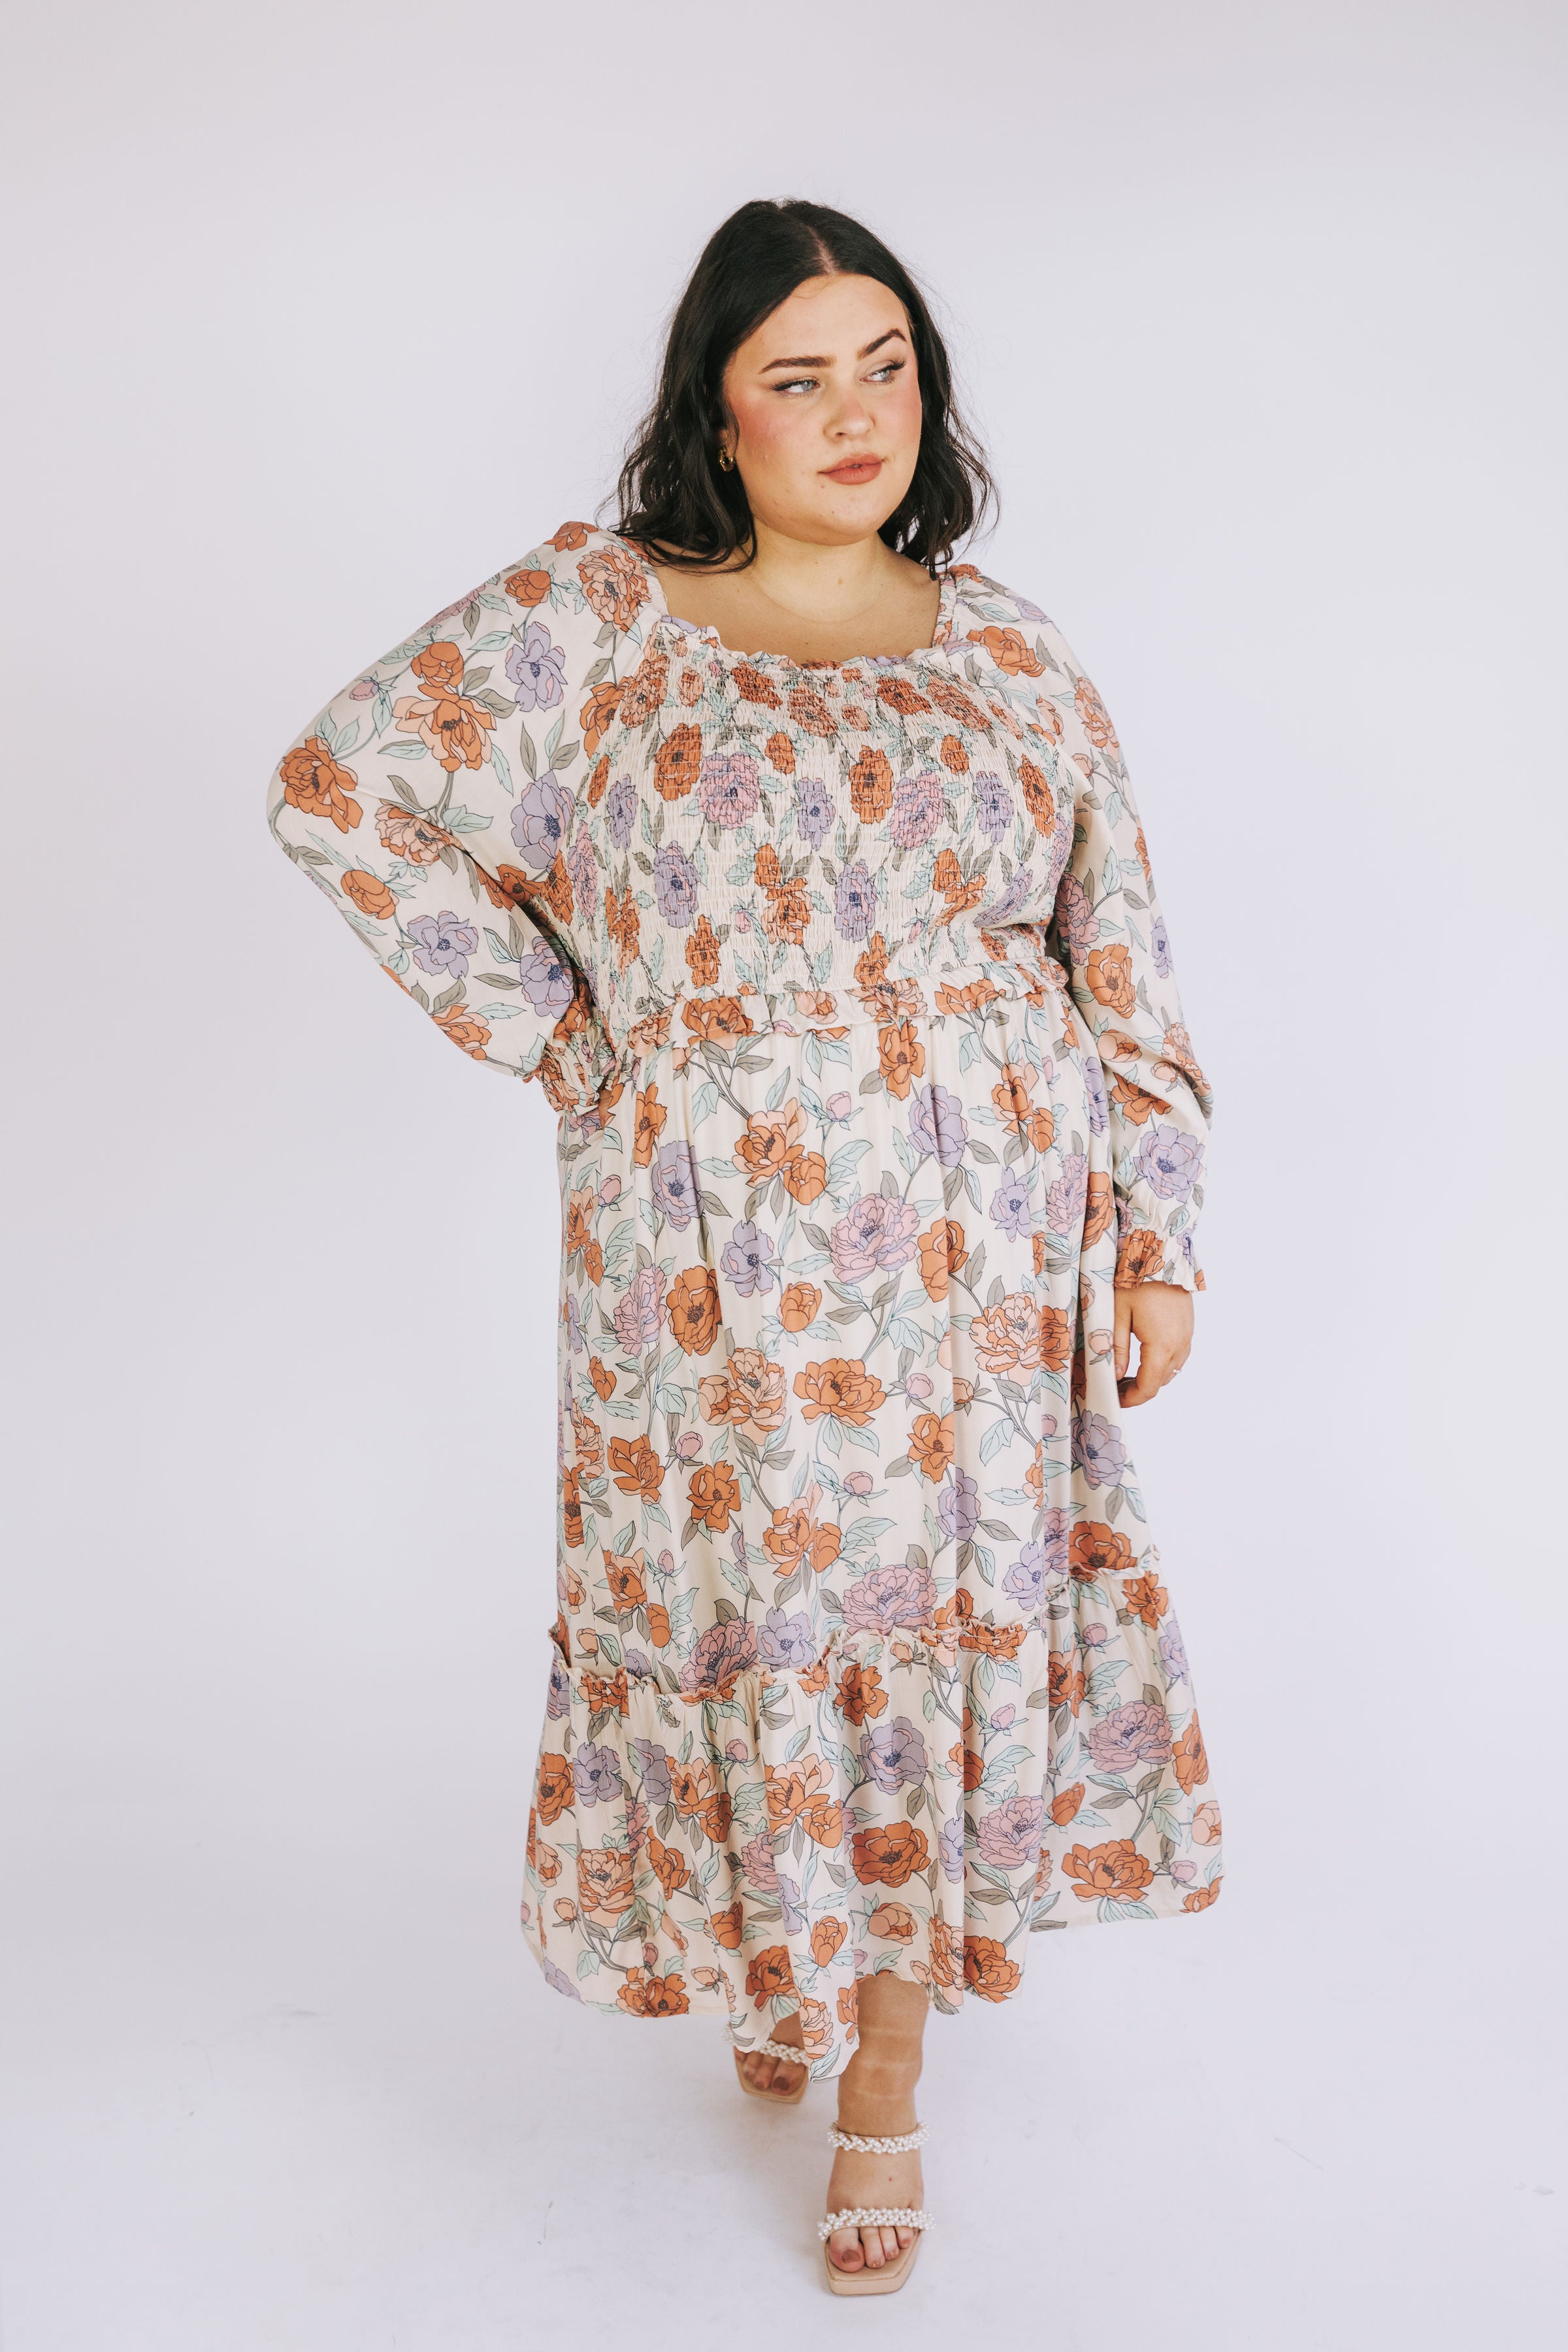 PLUS SIZE - In My Hands Dress